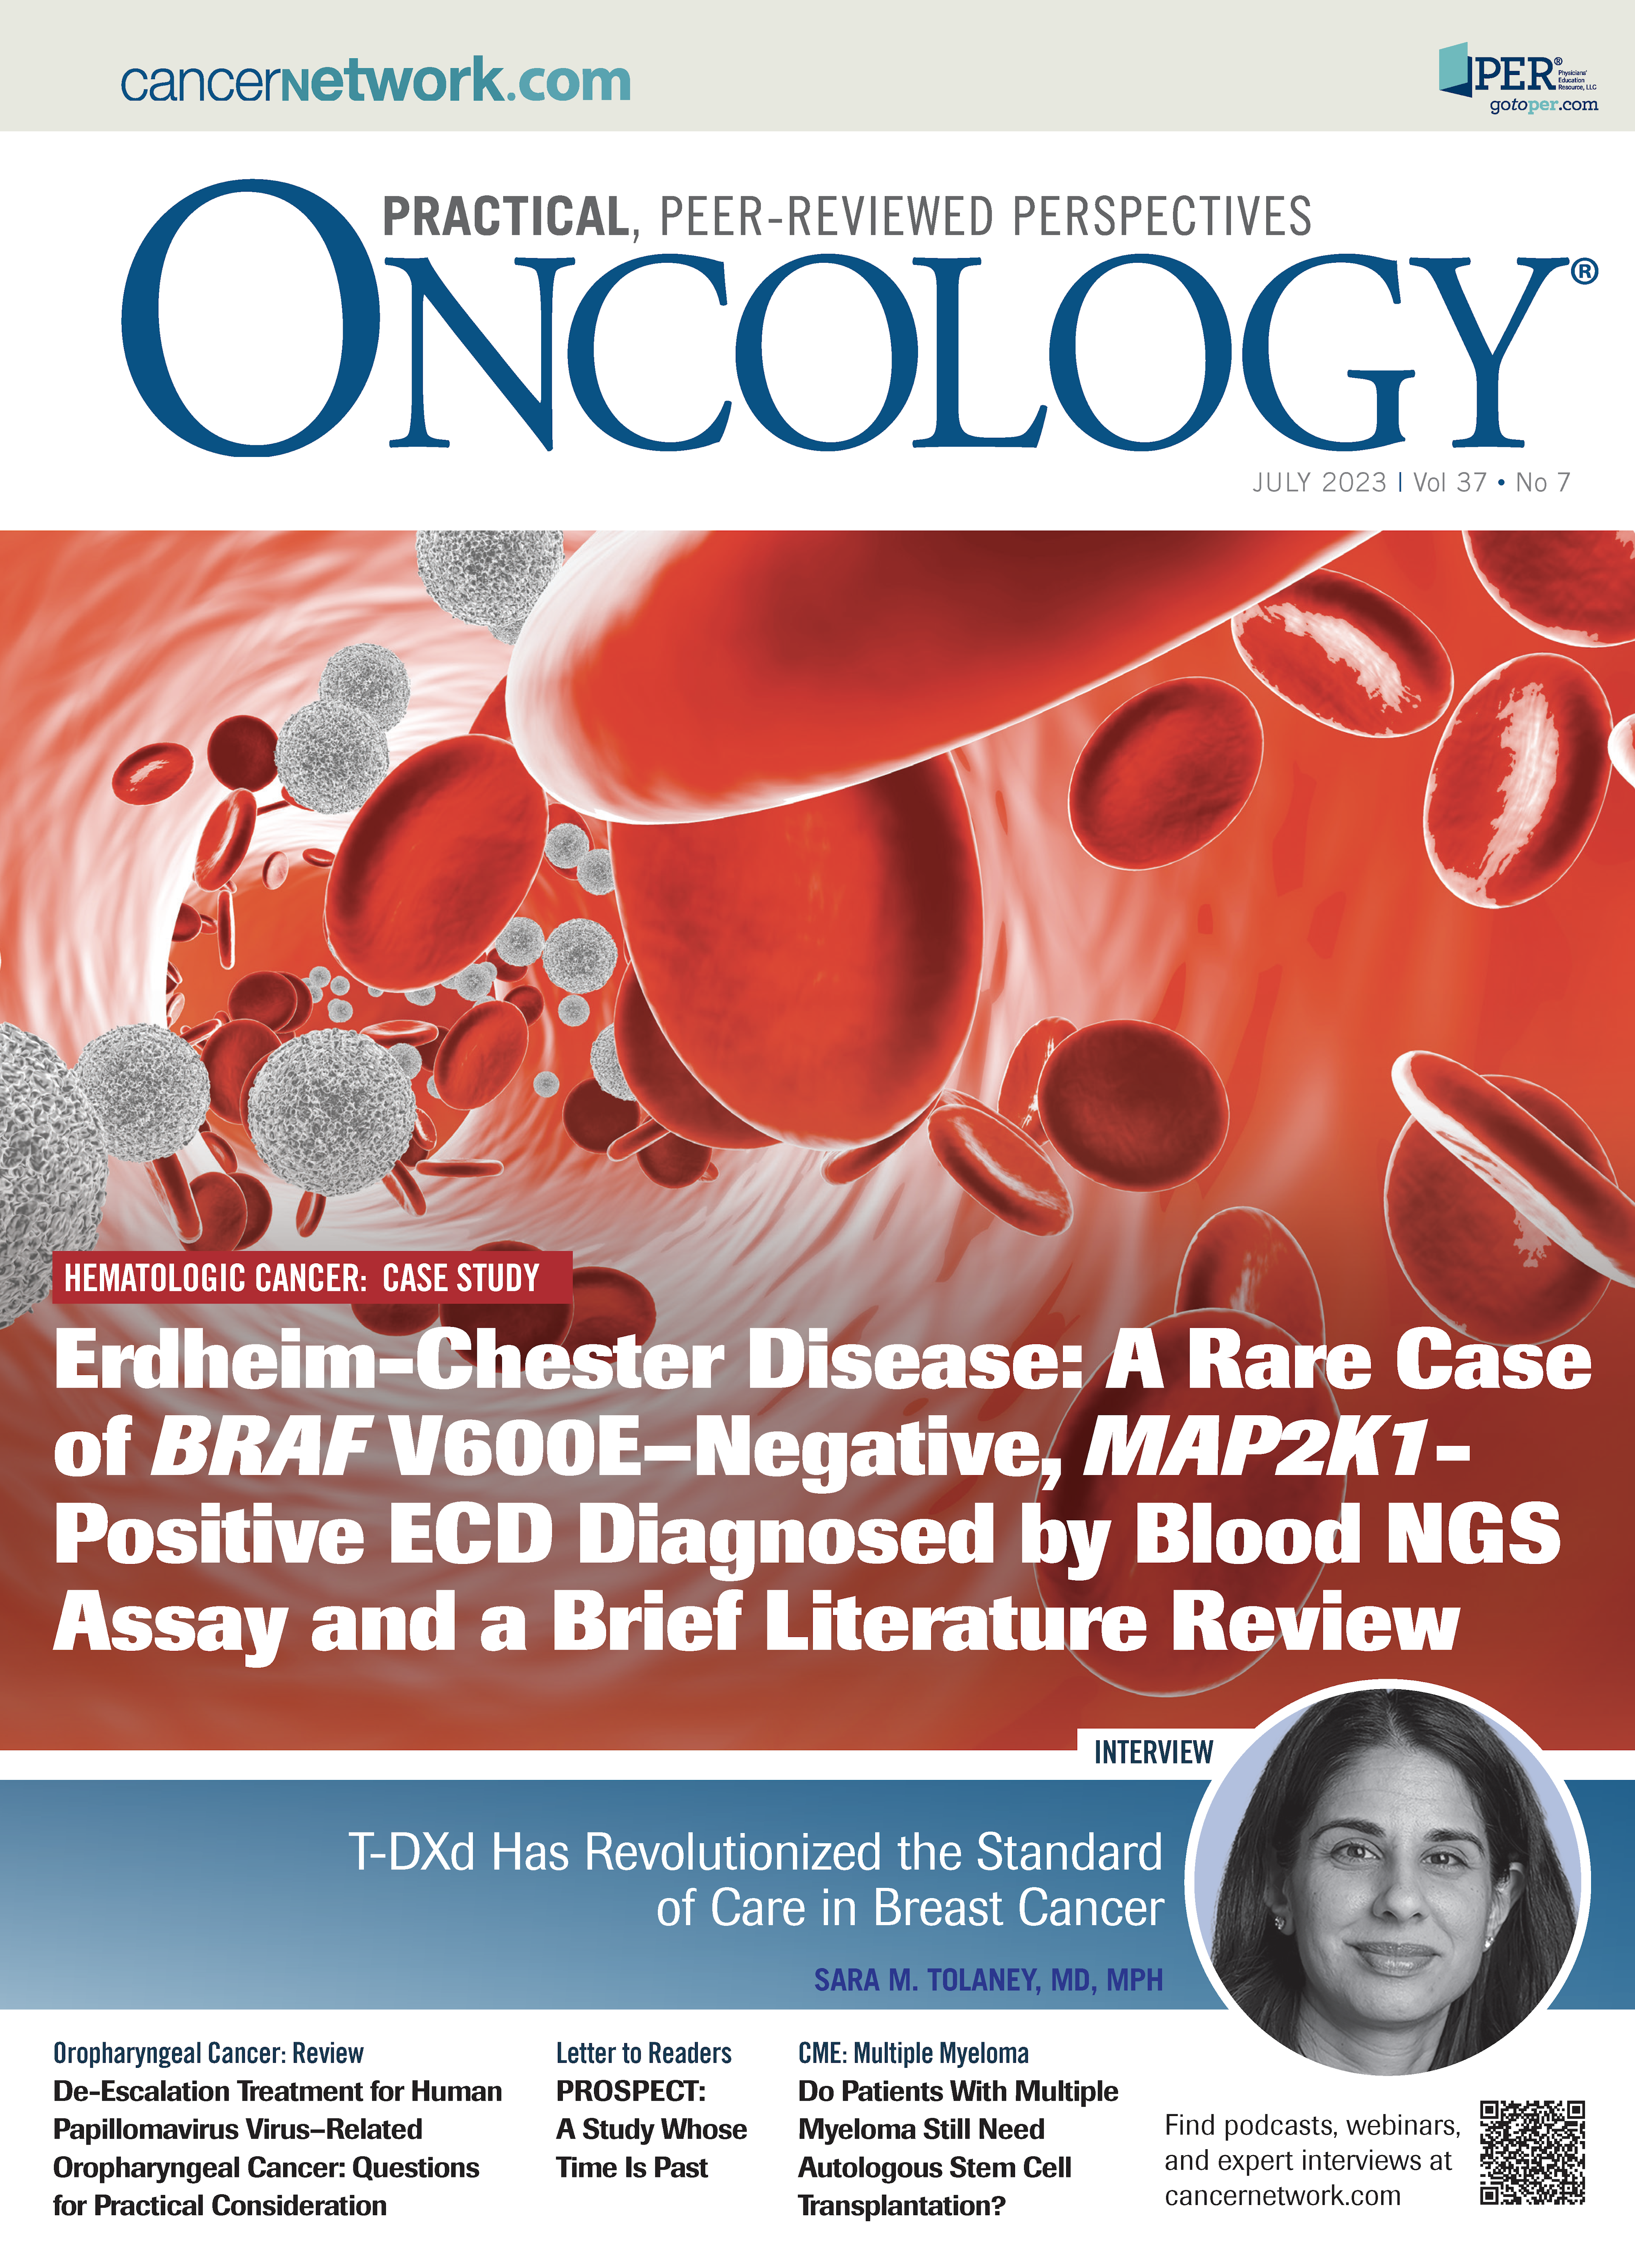 ONCOLOGY Vol 37, Issue 7